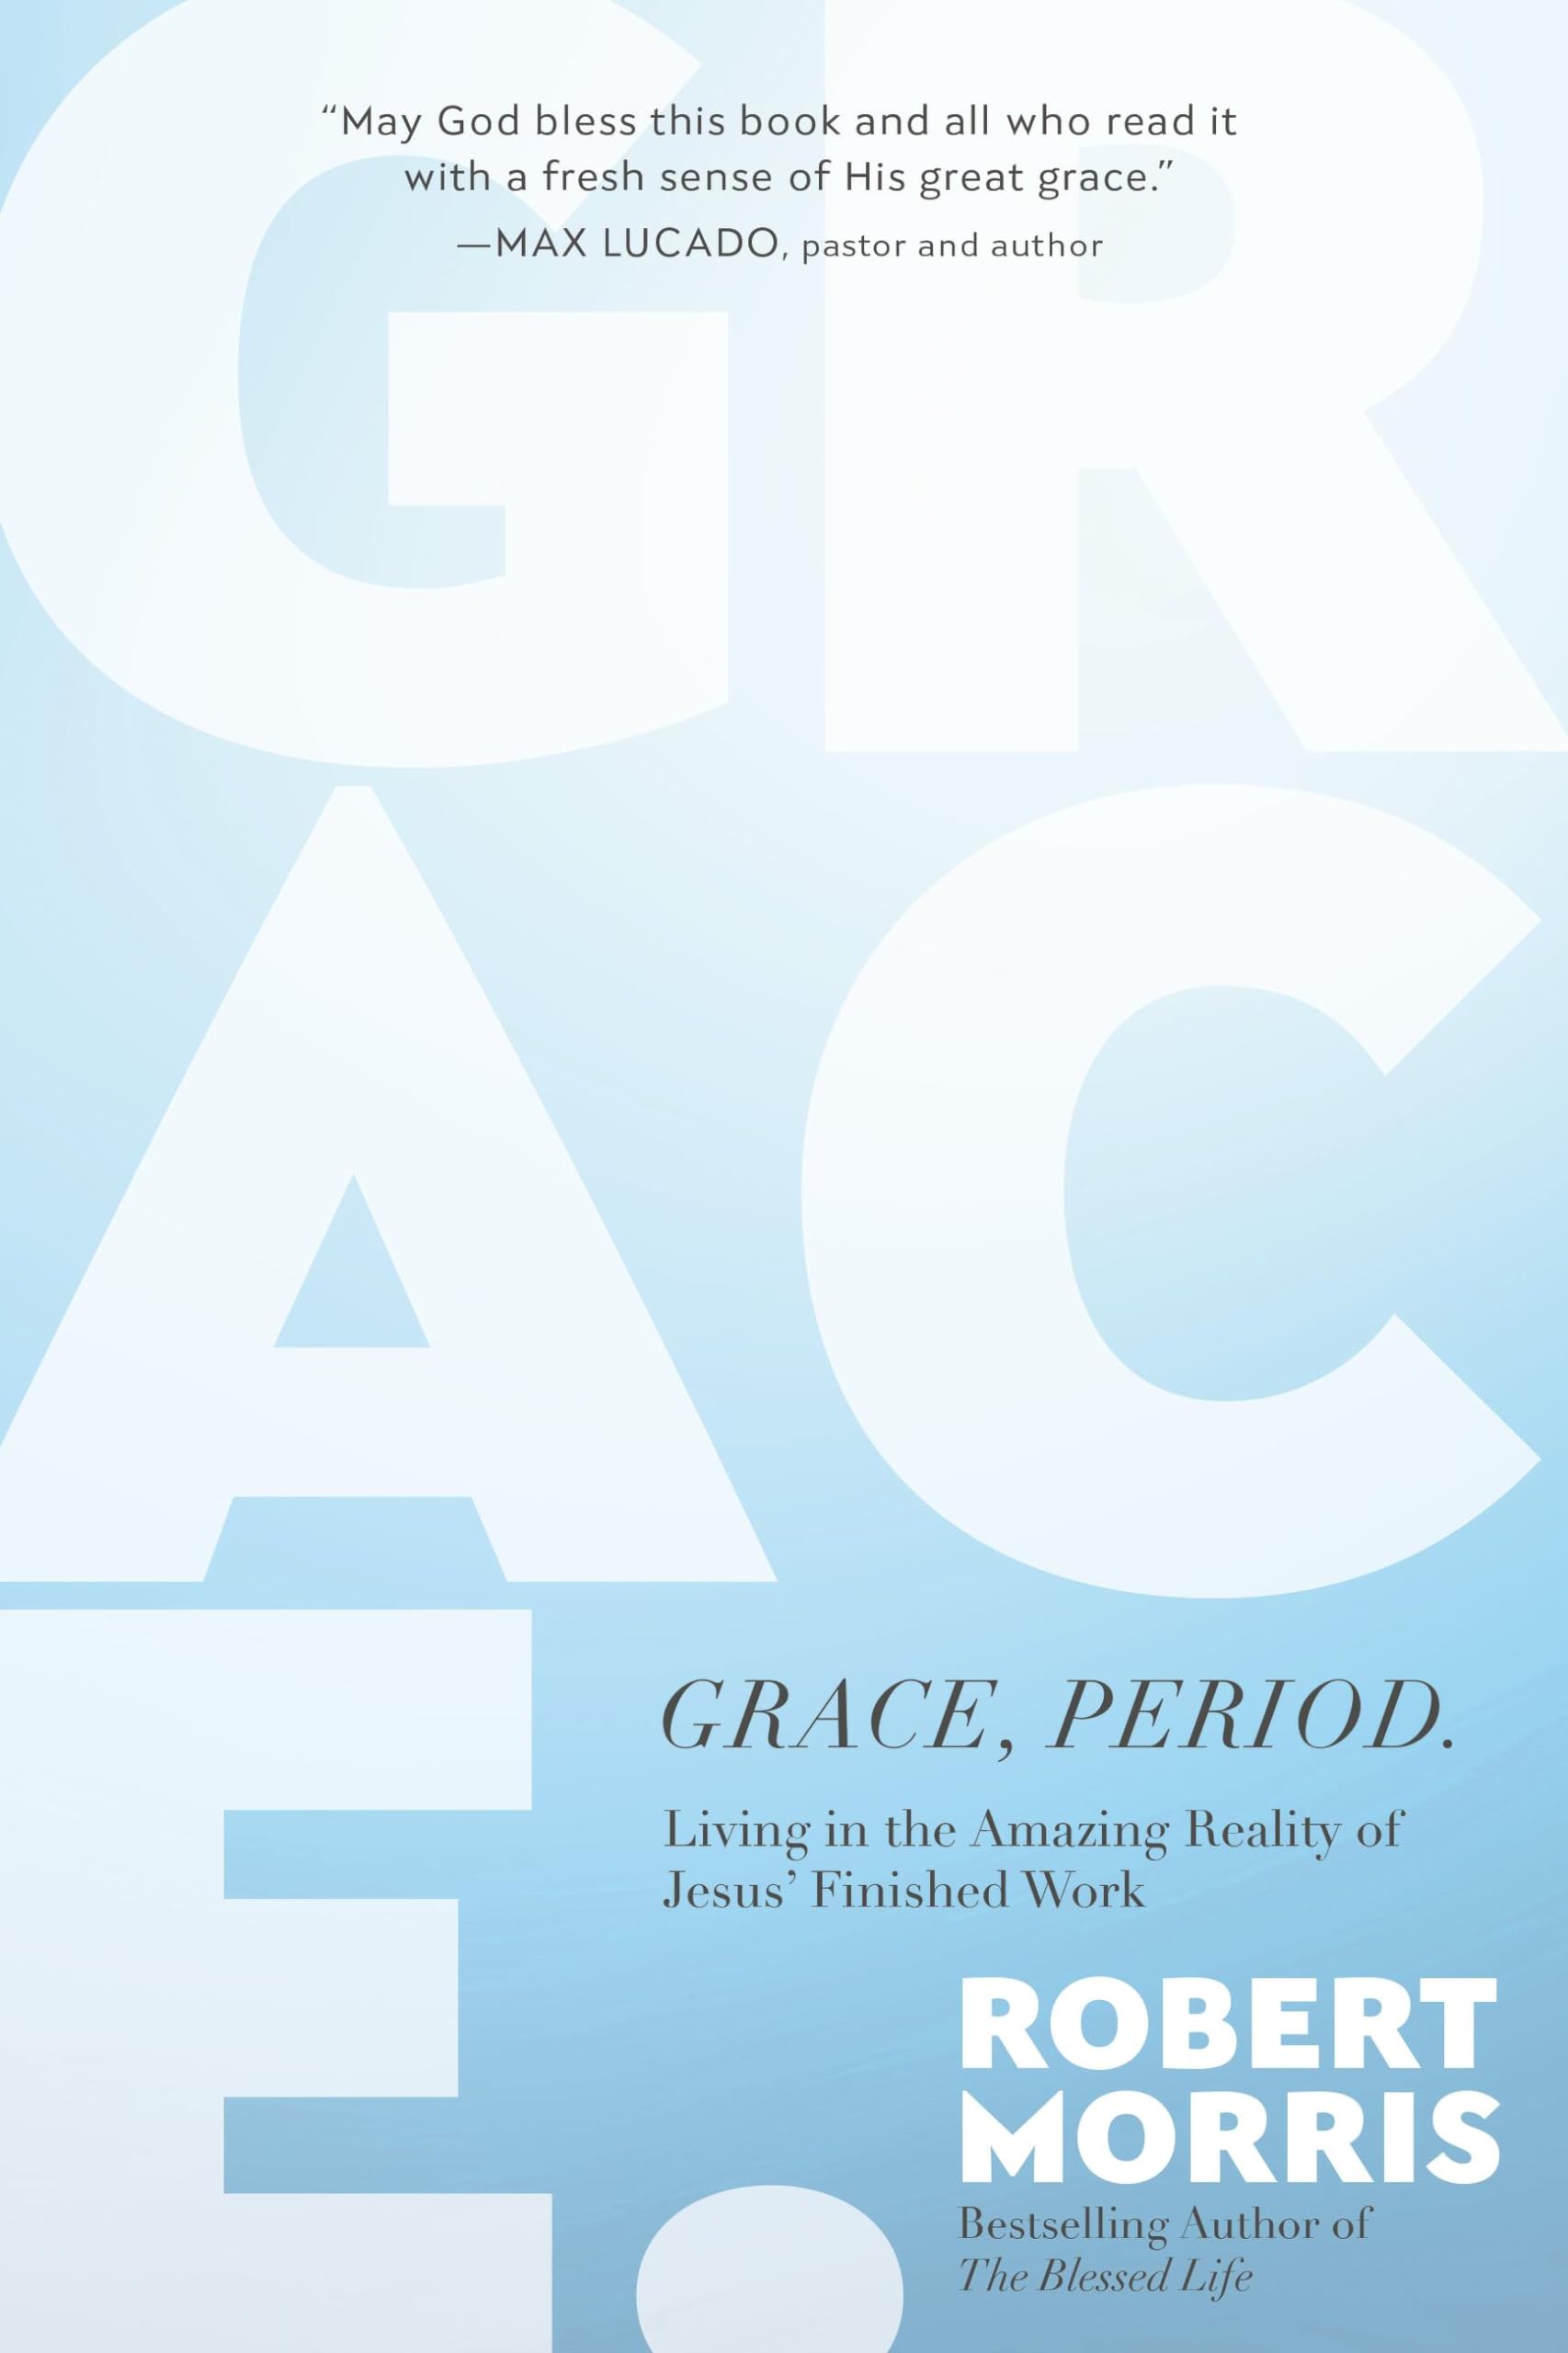 Grace, Period.: Living in the Amazing Reality of Jesus’ Finished Work